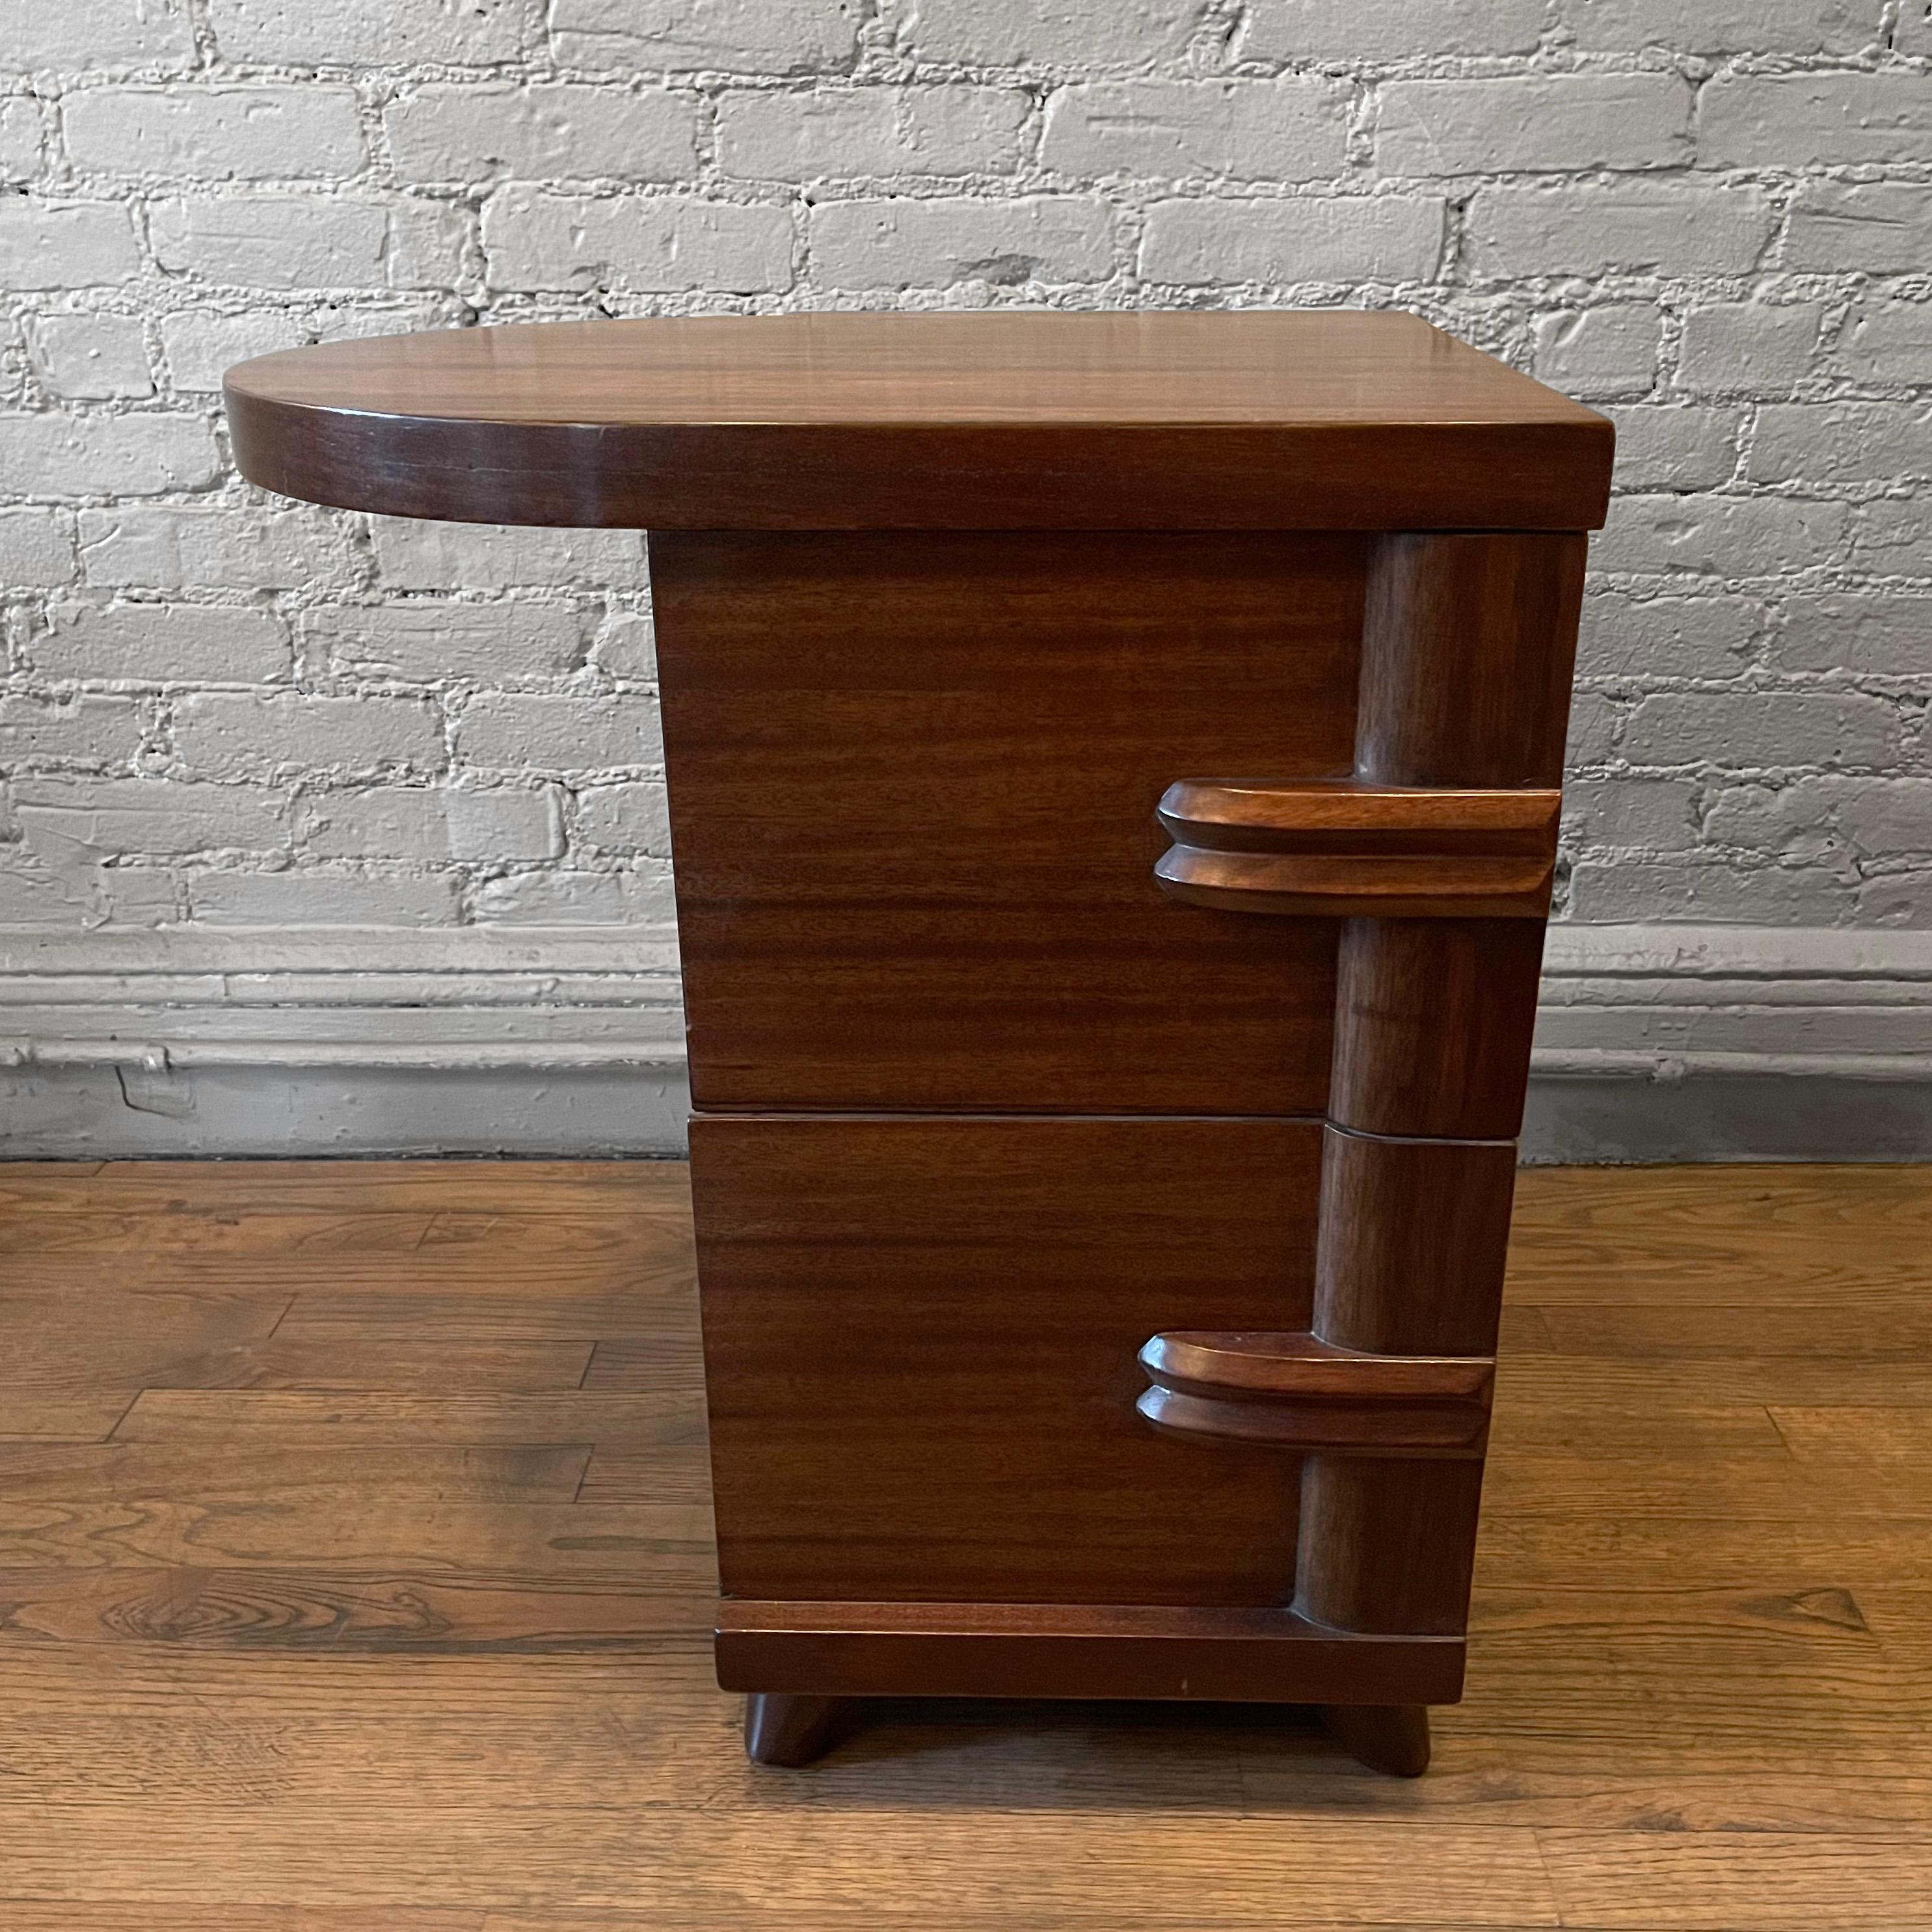 Art Deco, single, two drawer, walnut end table or nightstand features wonderful decorative elements like curved pulls and a rounded cantilever top.